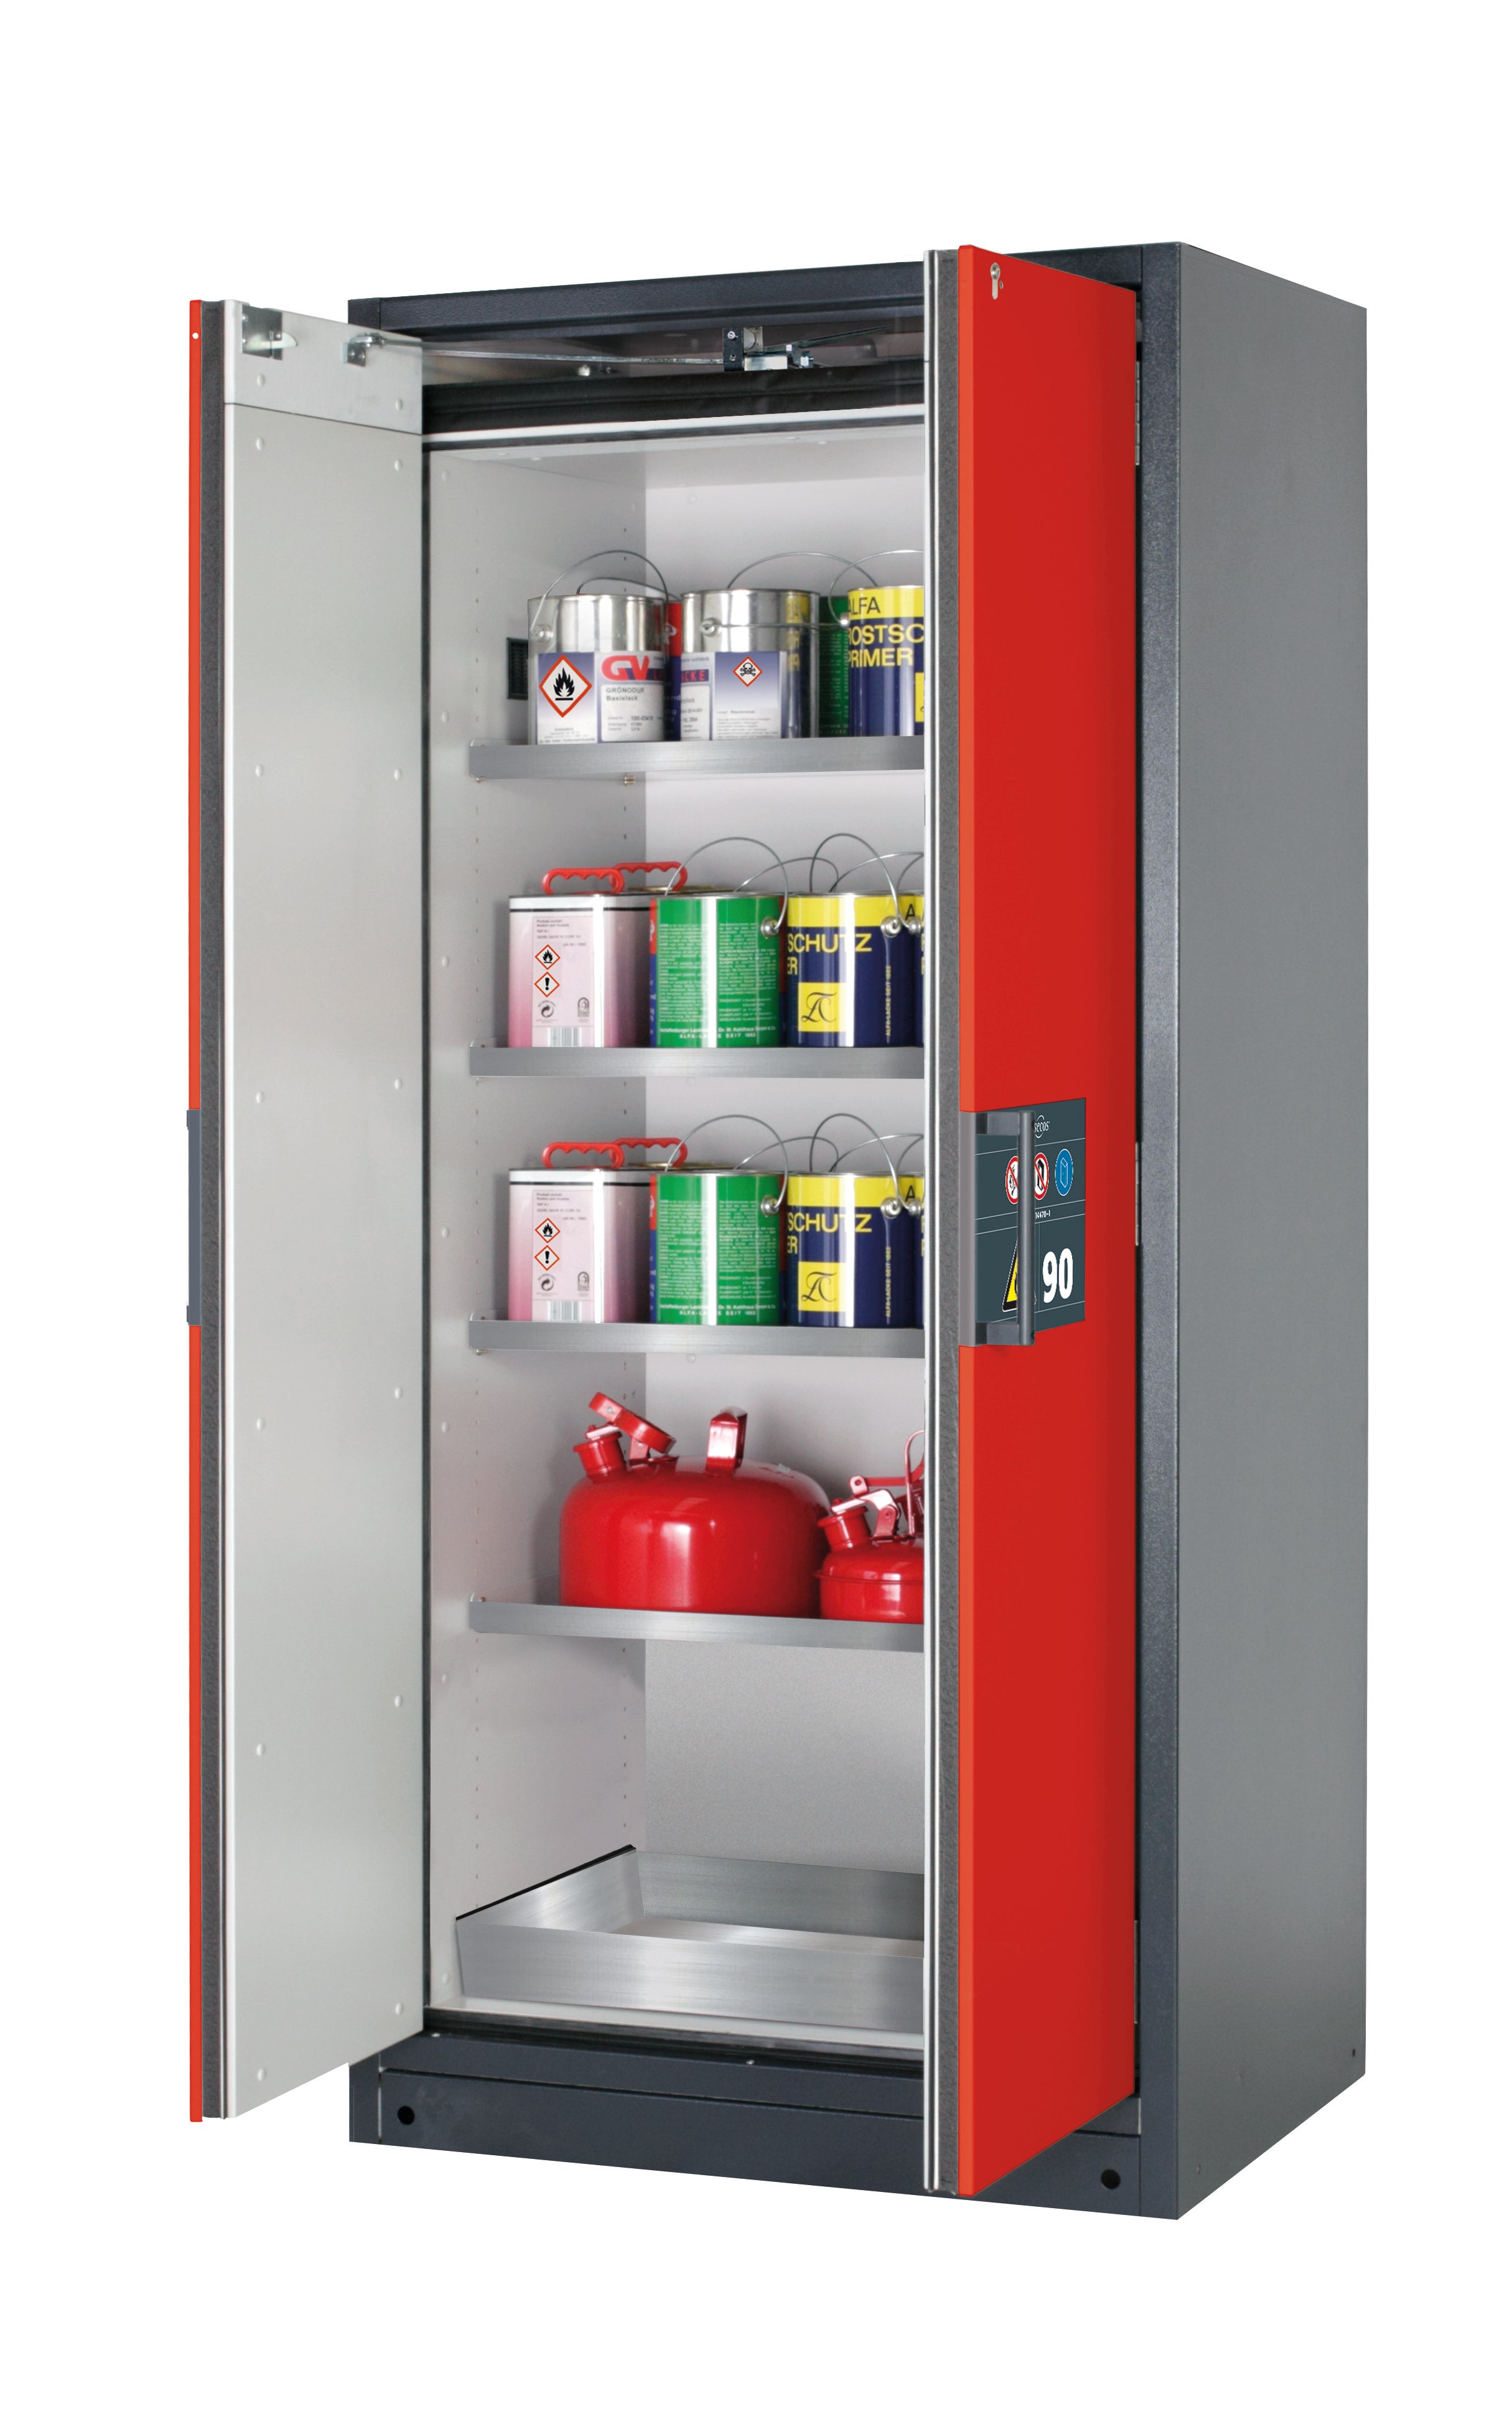 Type 90 safety storage cabinet Q-PEGASUS-90 model Q90.195.090.WDAC in traffic red RAL 3020 with 4x shelf standard (stainless steel 1.4301),